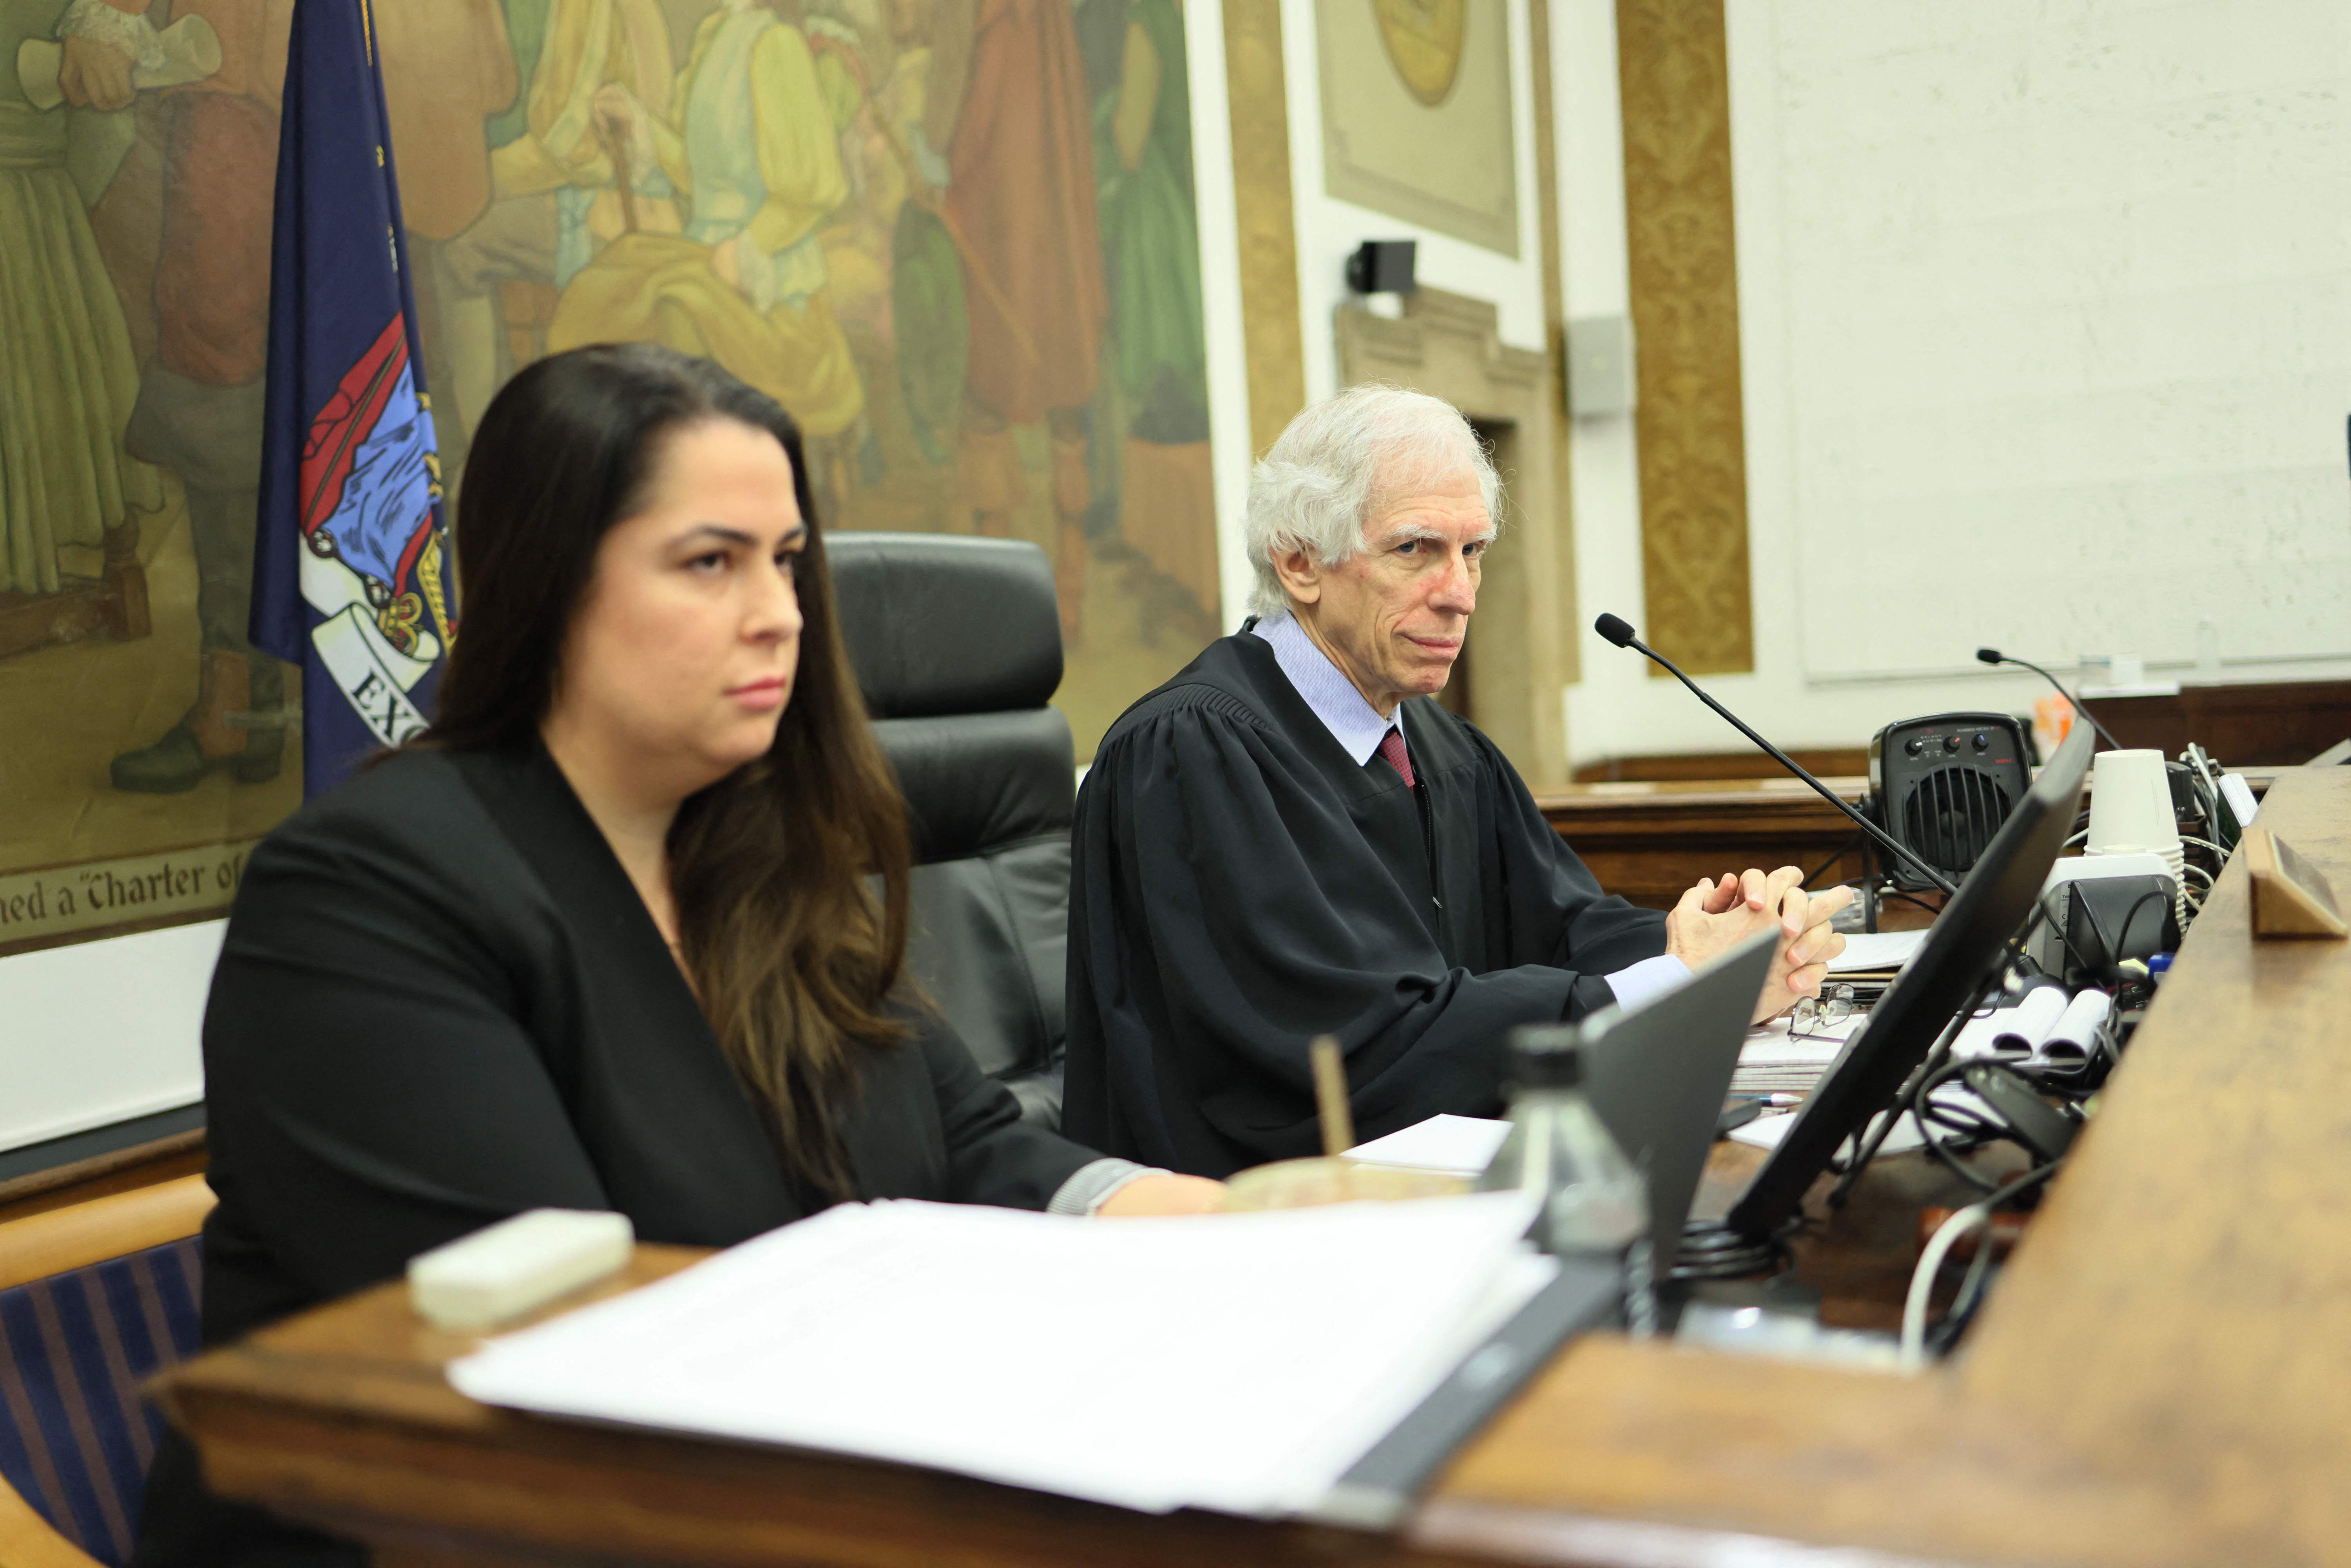 Justice Arthur Engoron, right, presides over the civil fraud trial of the Trump Organization at the New York State Supreme Court in New York City, with his principal clerk Allison Greenfield.